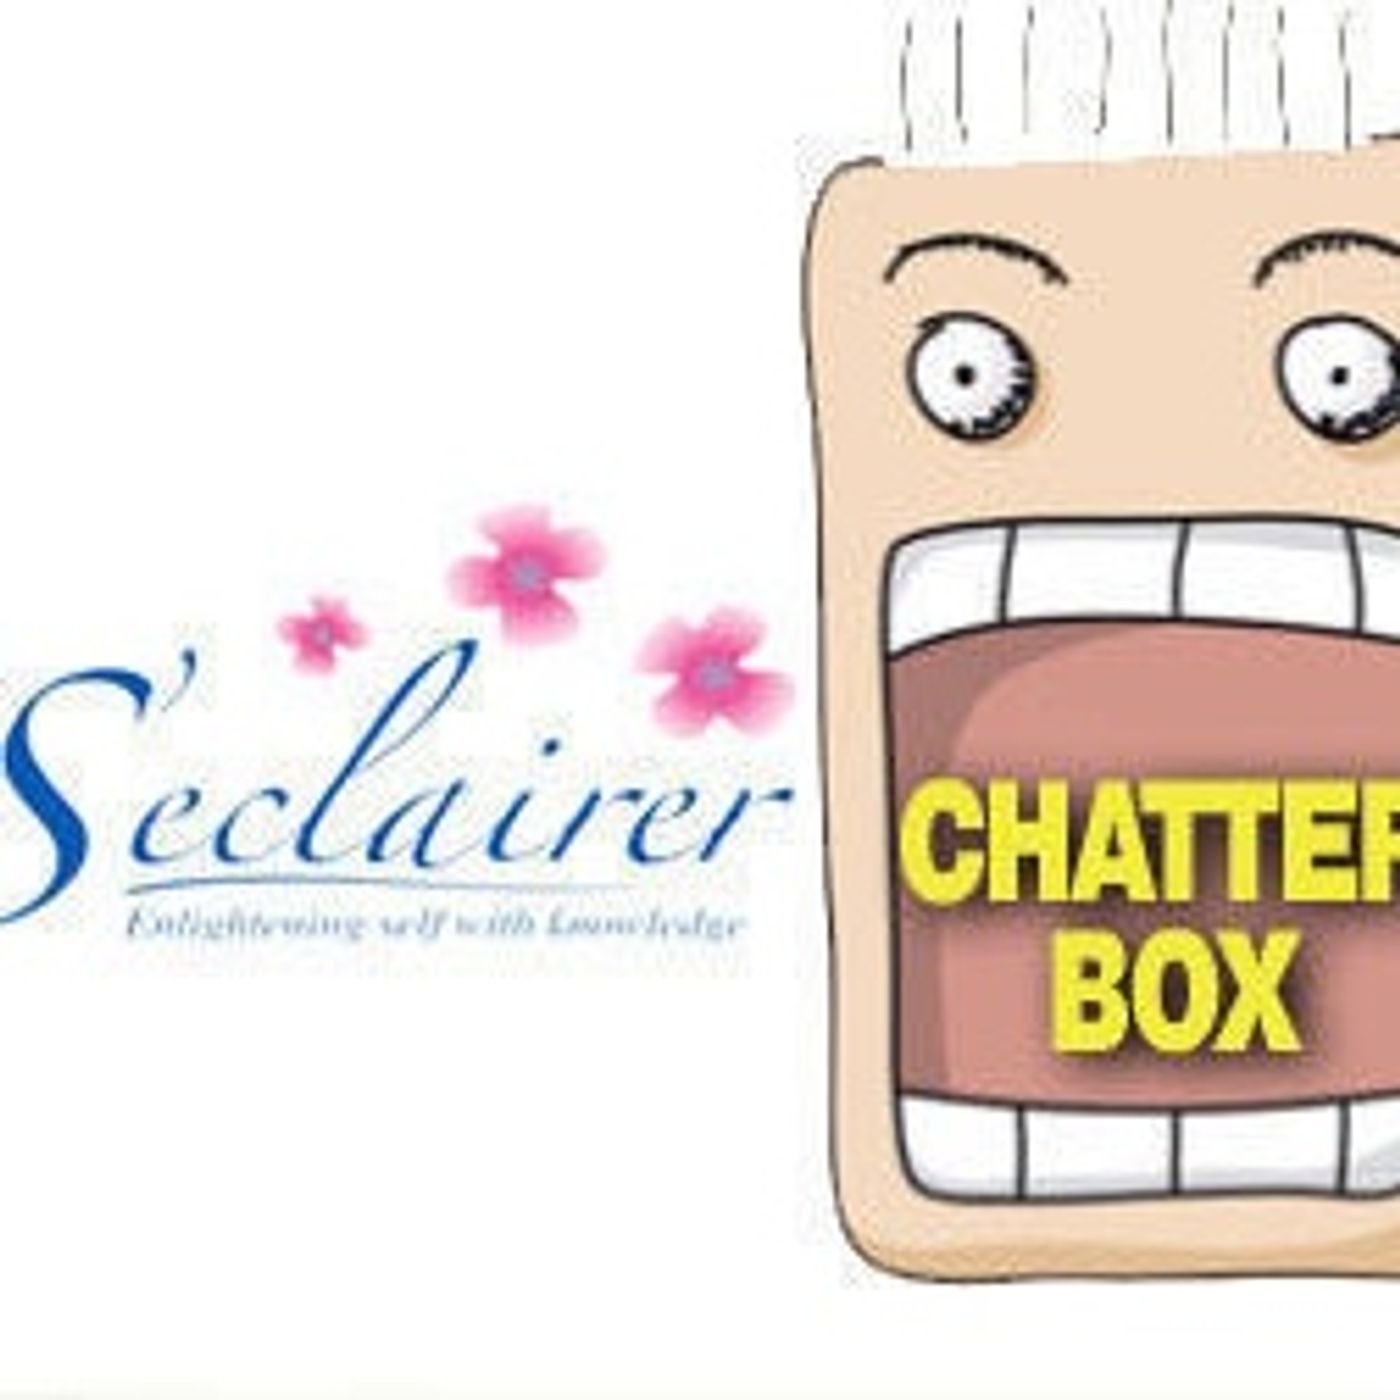 S'eclairer Chatterbox